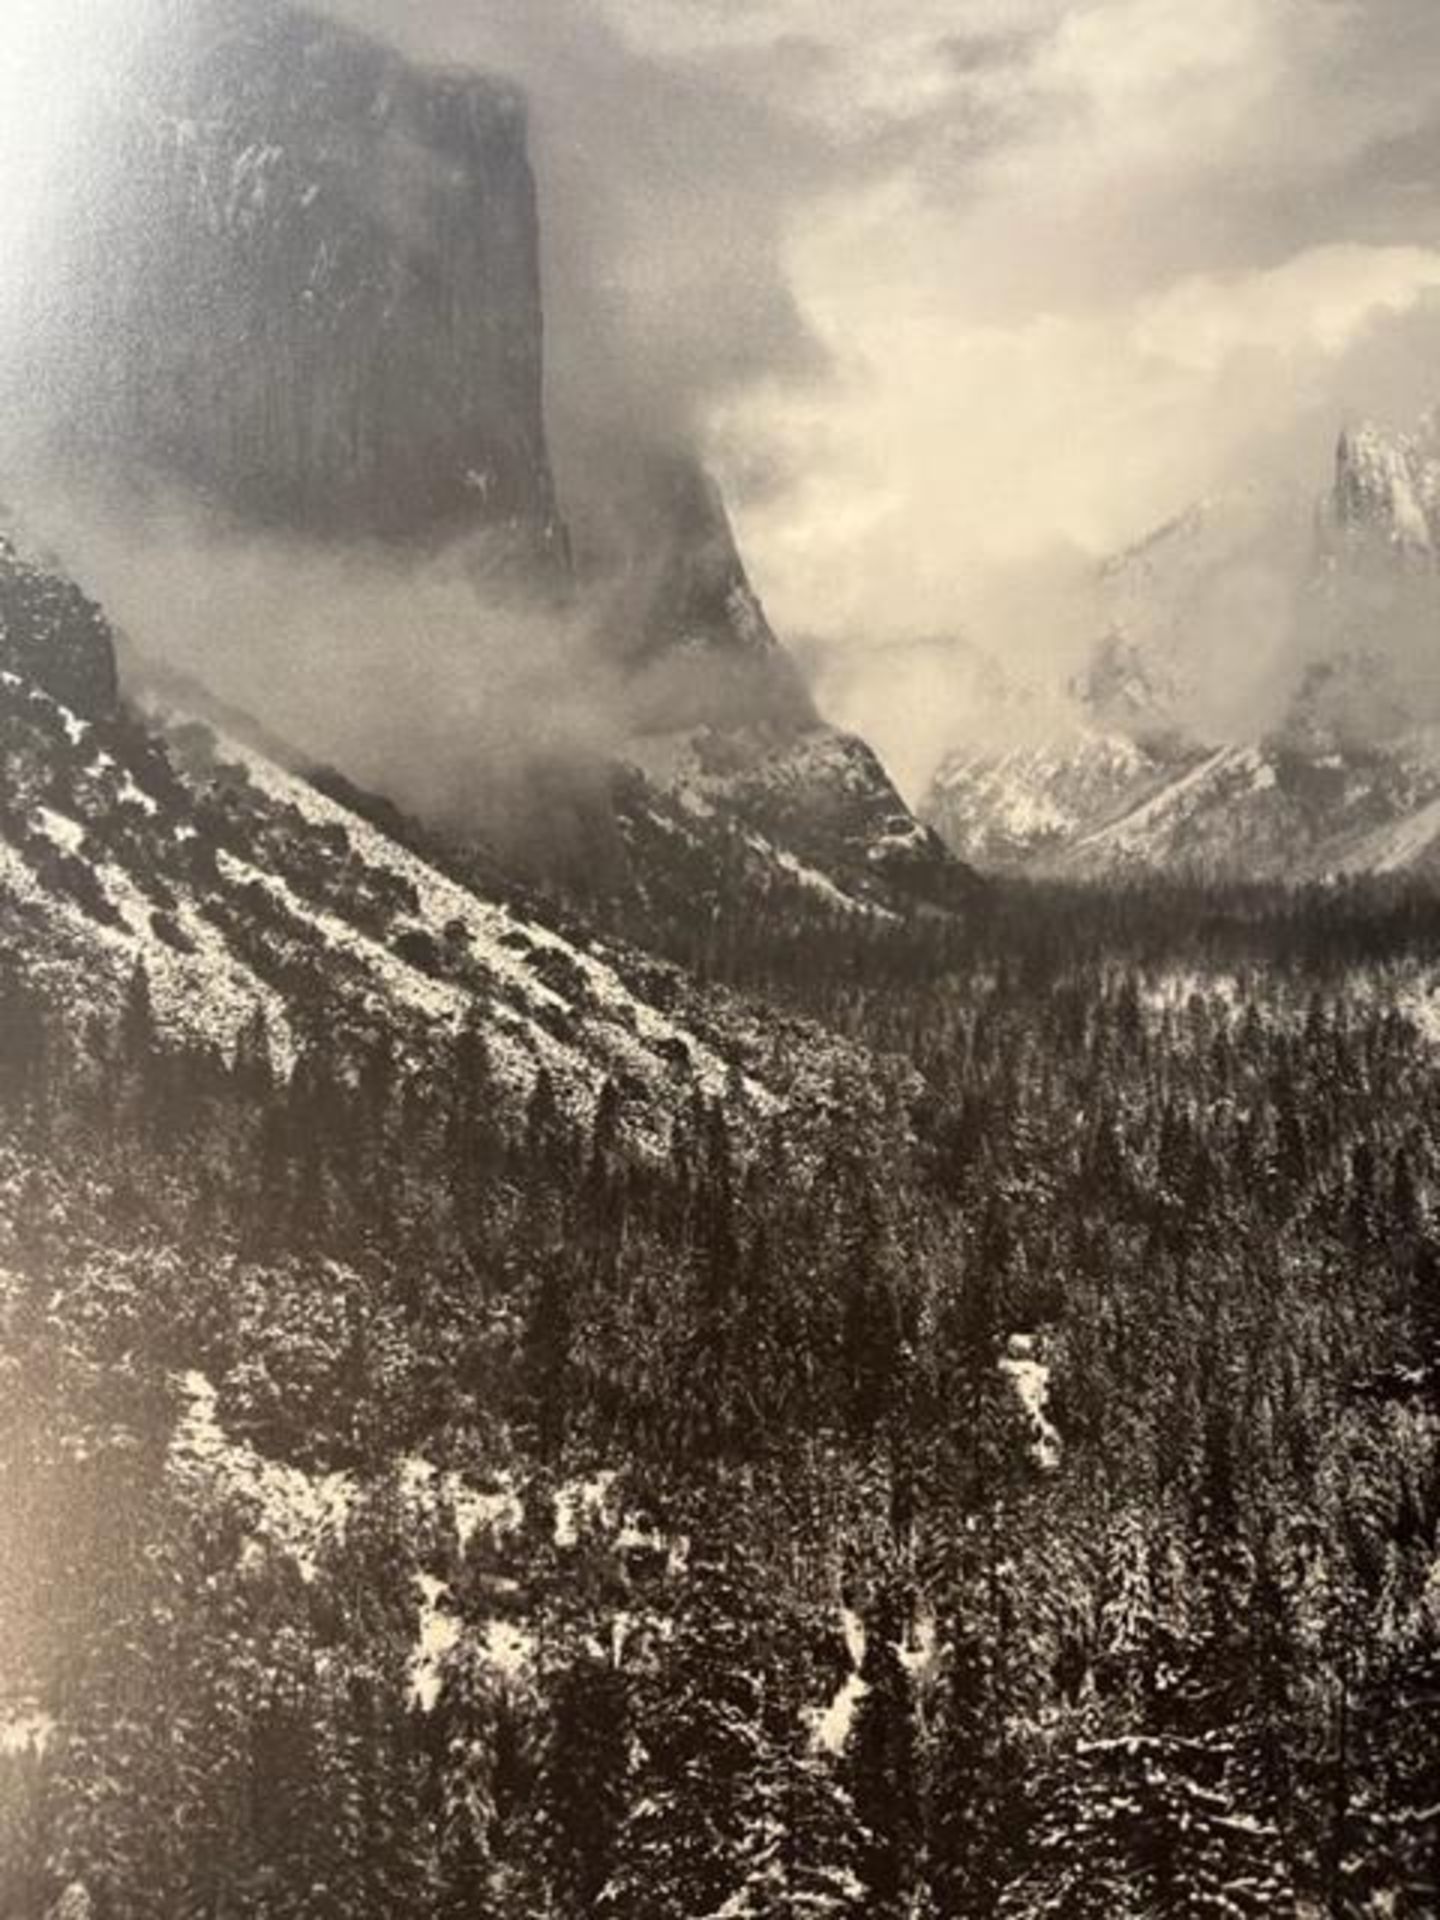 Ansel Adams "Clearing Winter Storm" Print. - Image 4 of 6